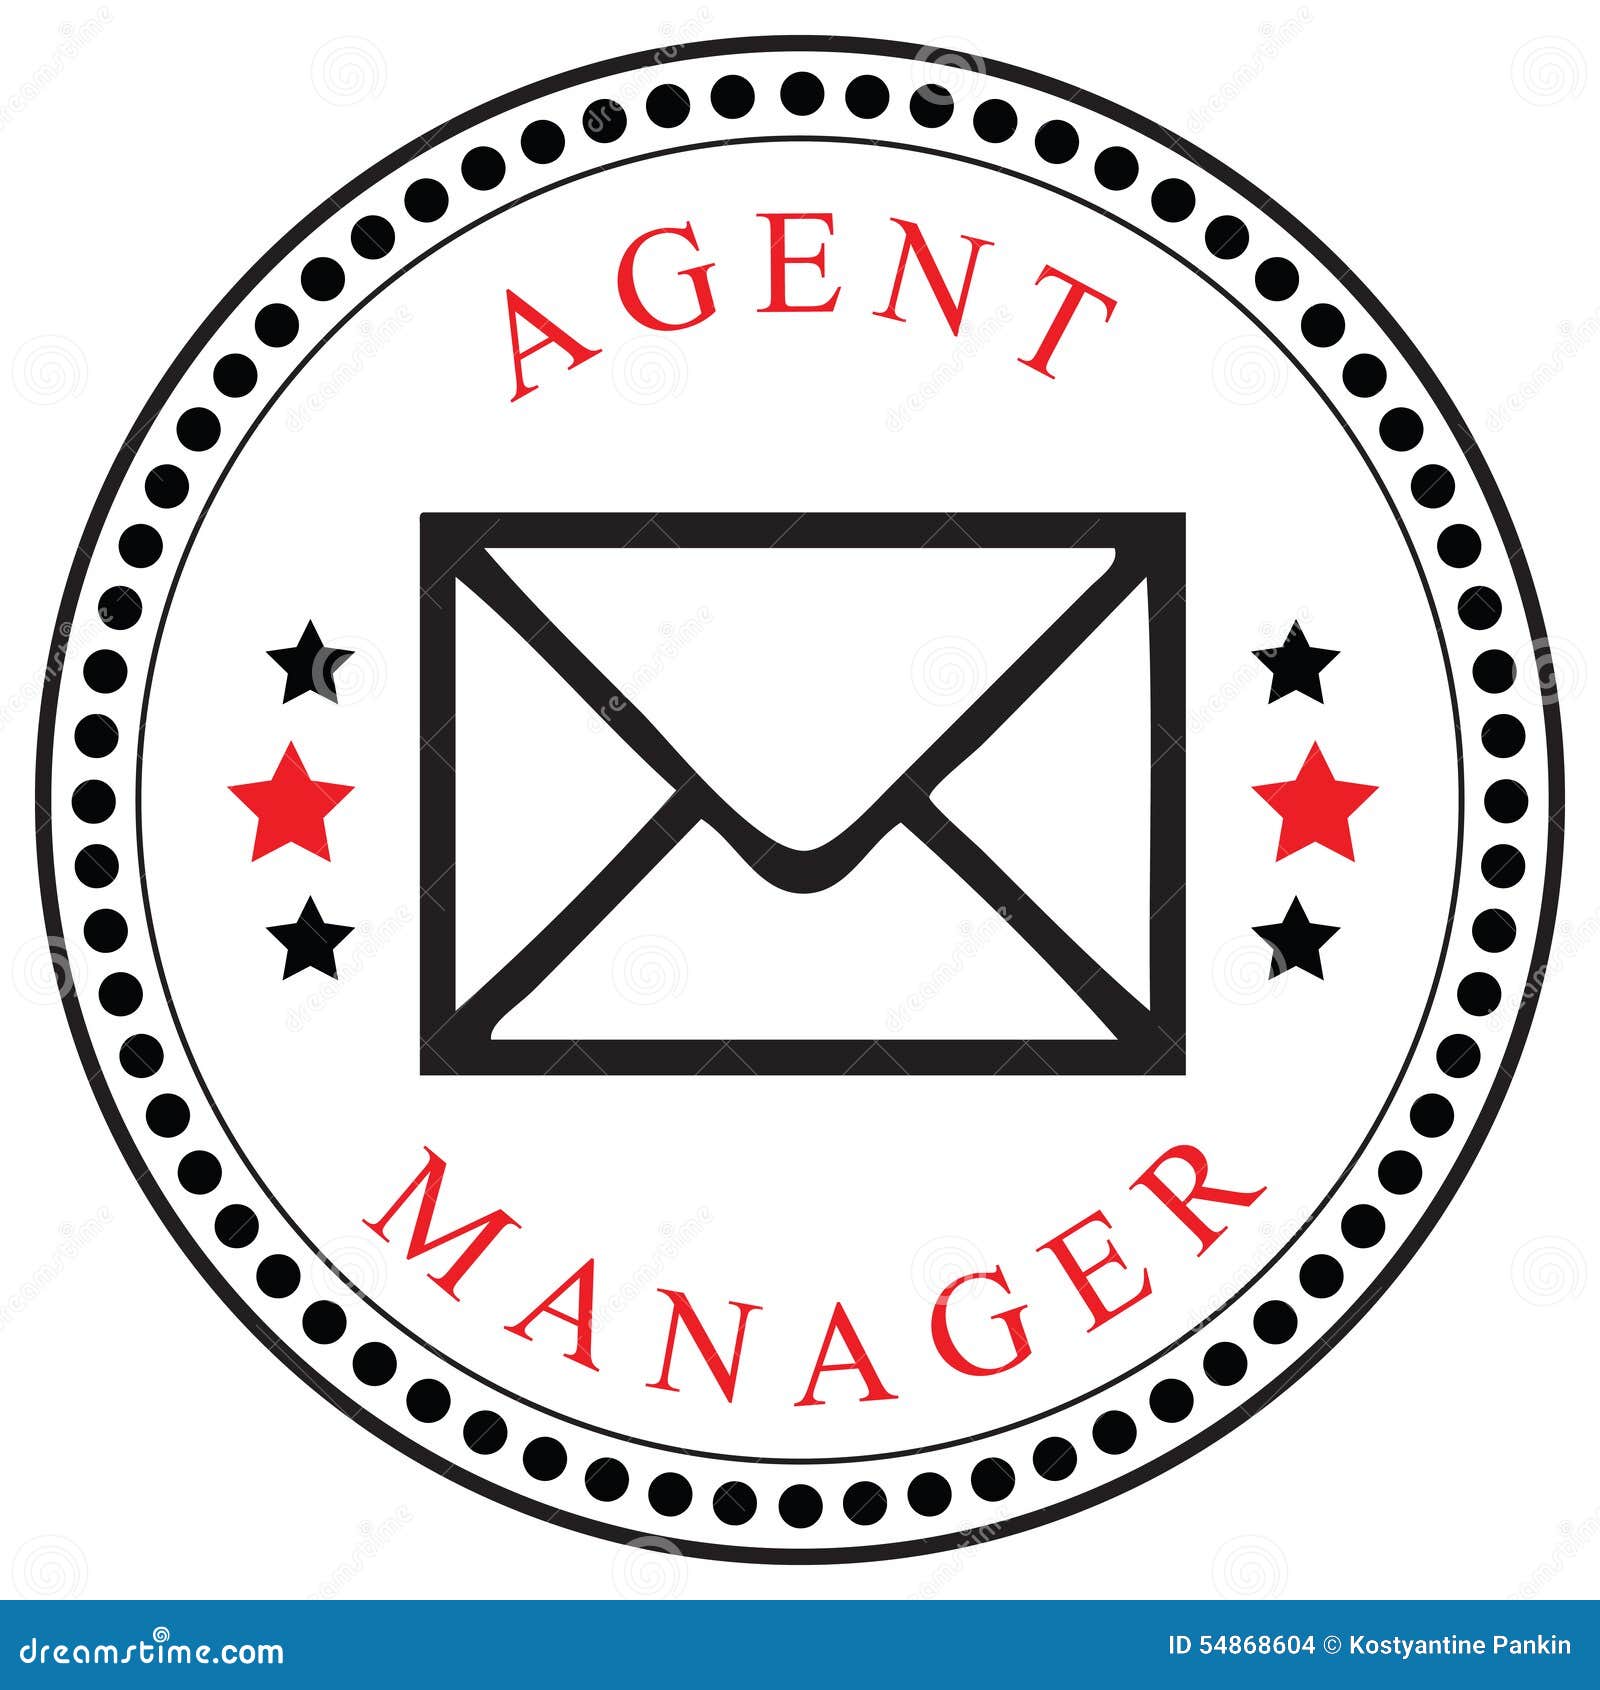 mailings agent or manager